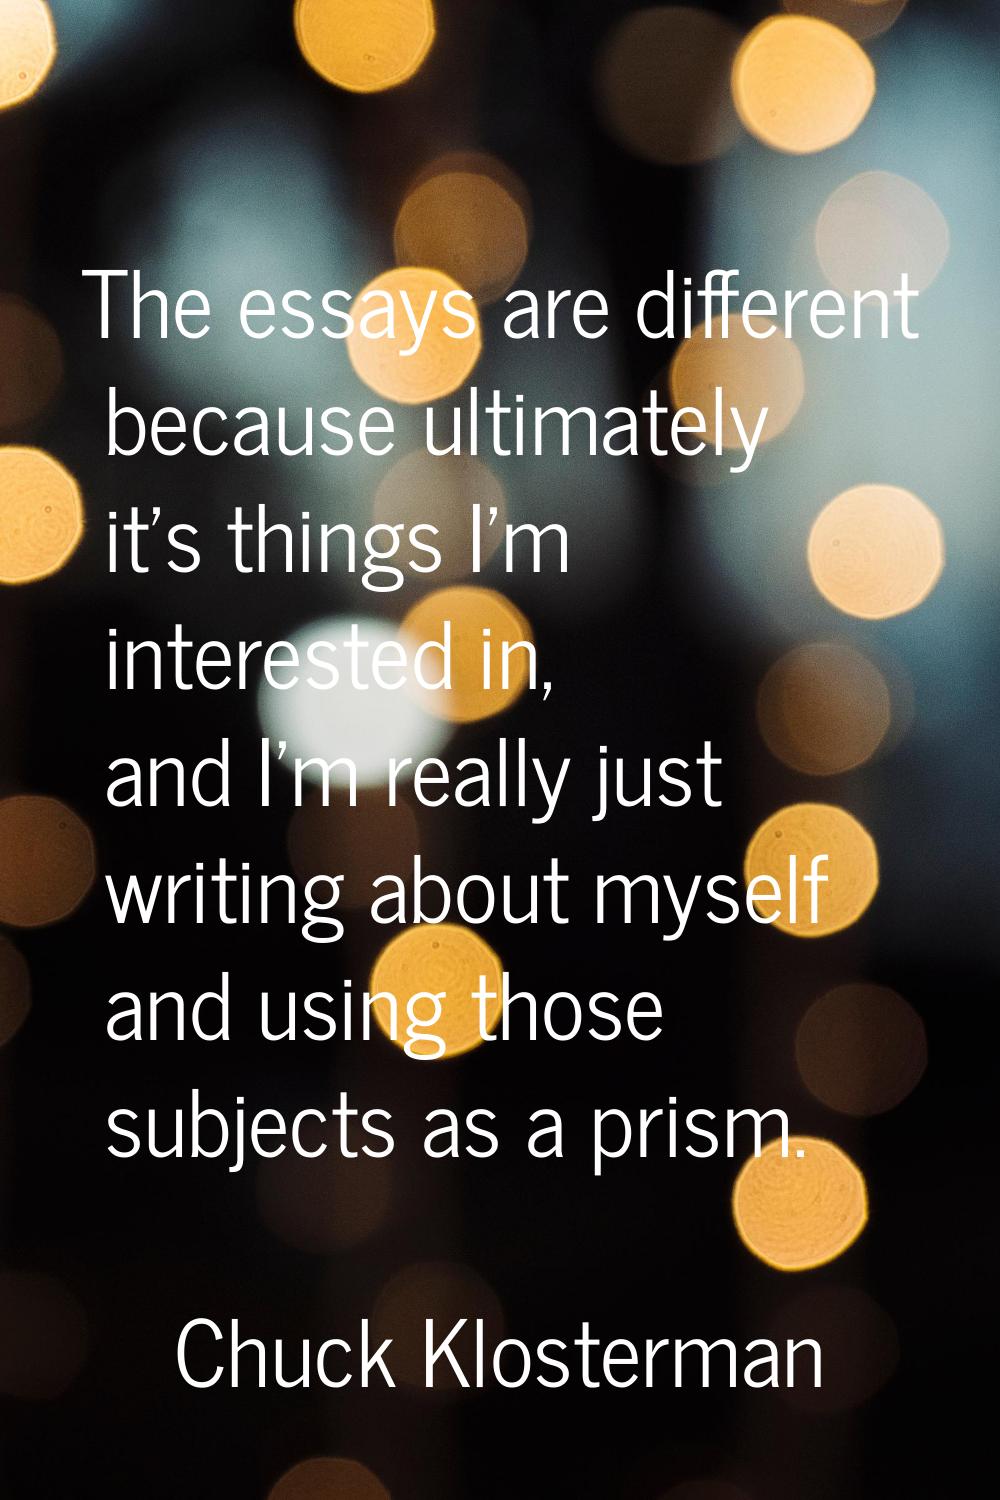 The essays are different because ultimately it's things I'm interested in, and I'm really just writ